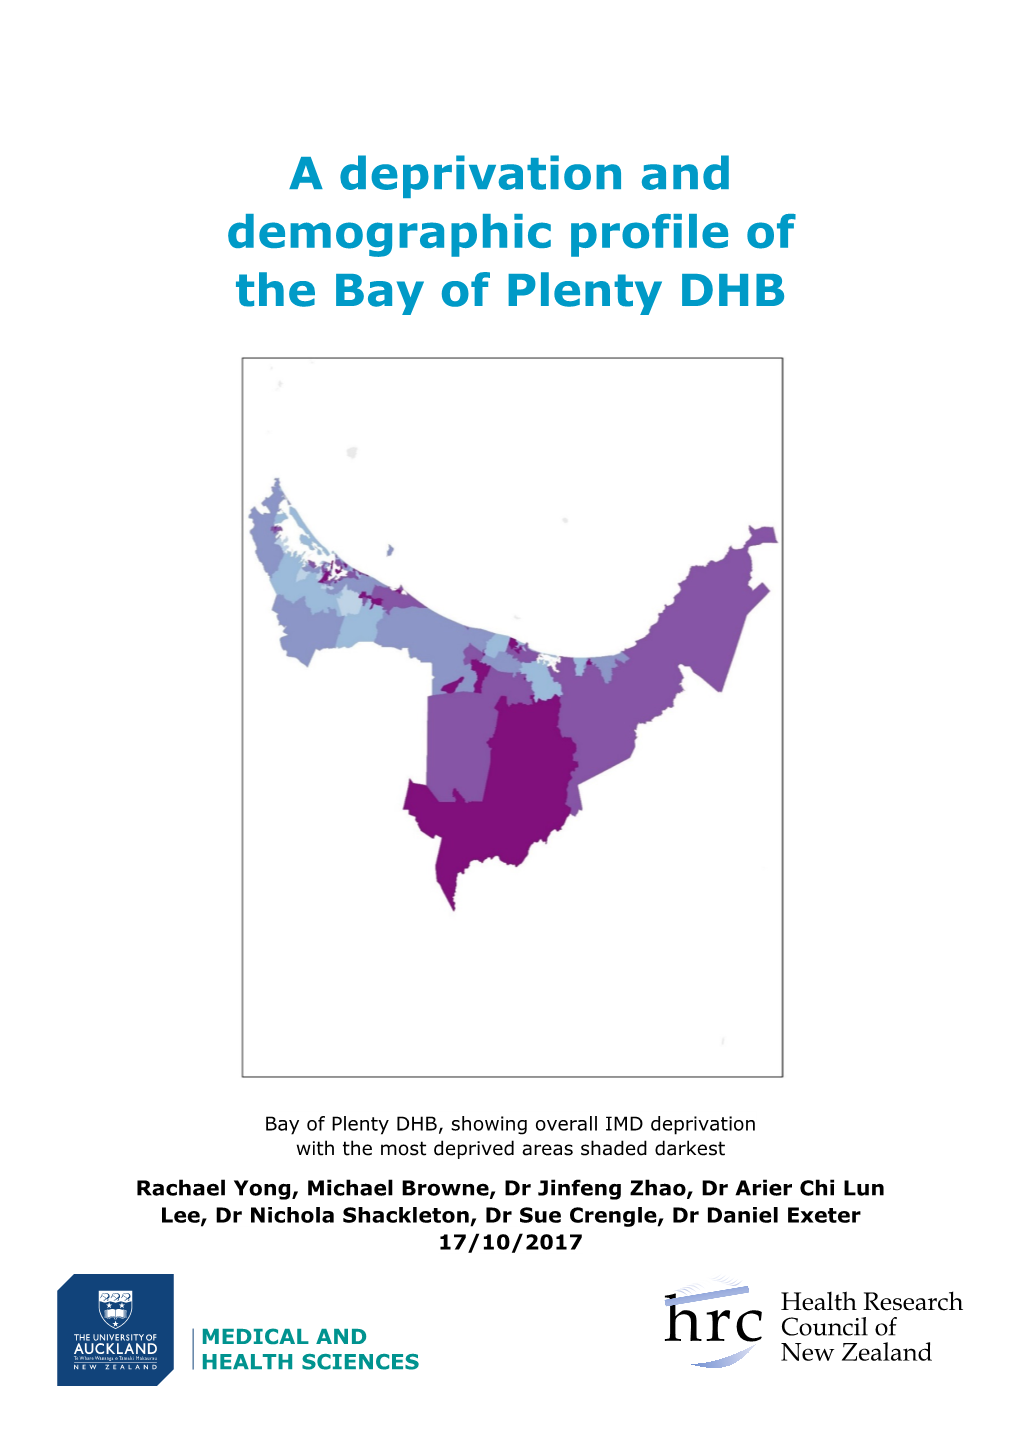 A Deprivation and Demographic Profile of the Bay of Plenty DHB